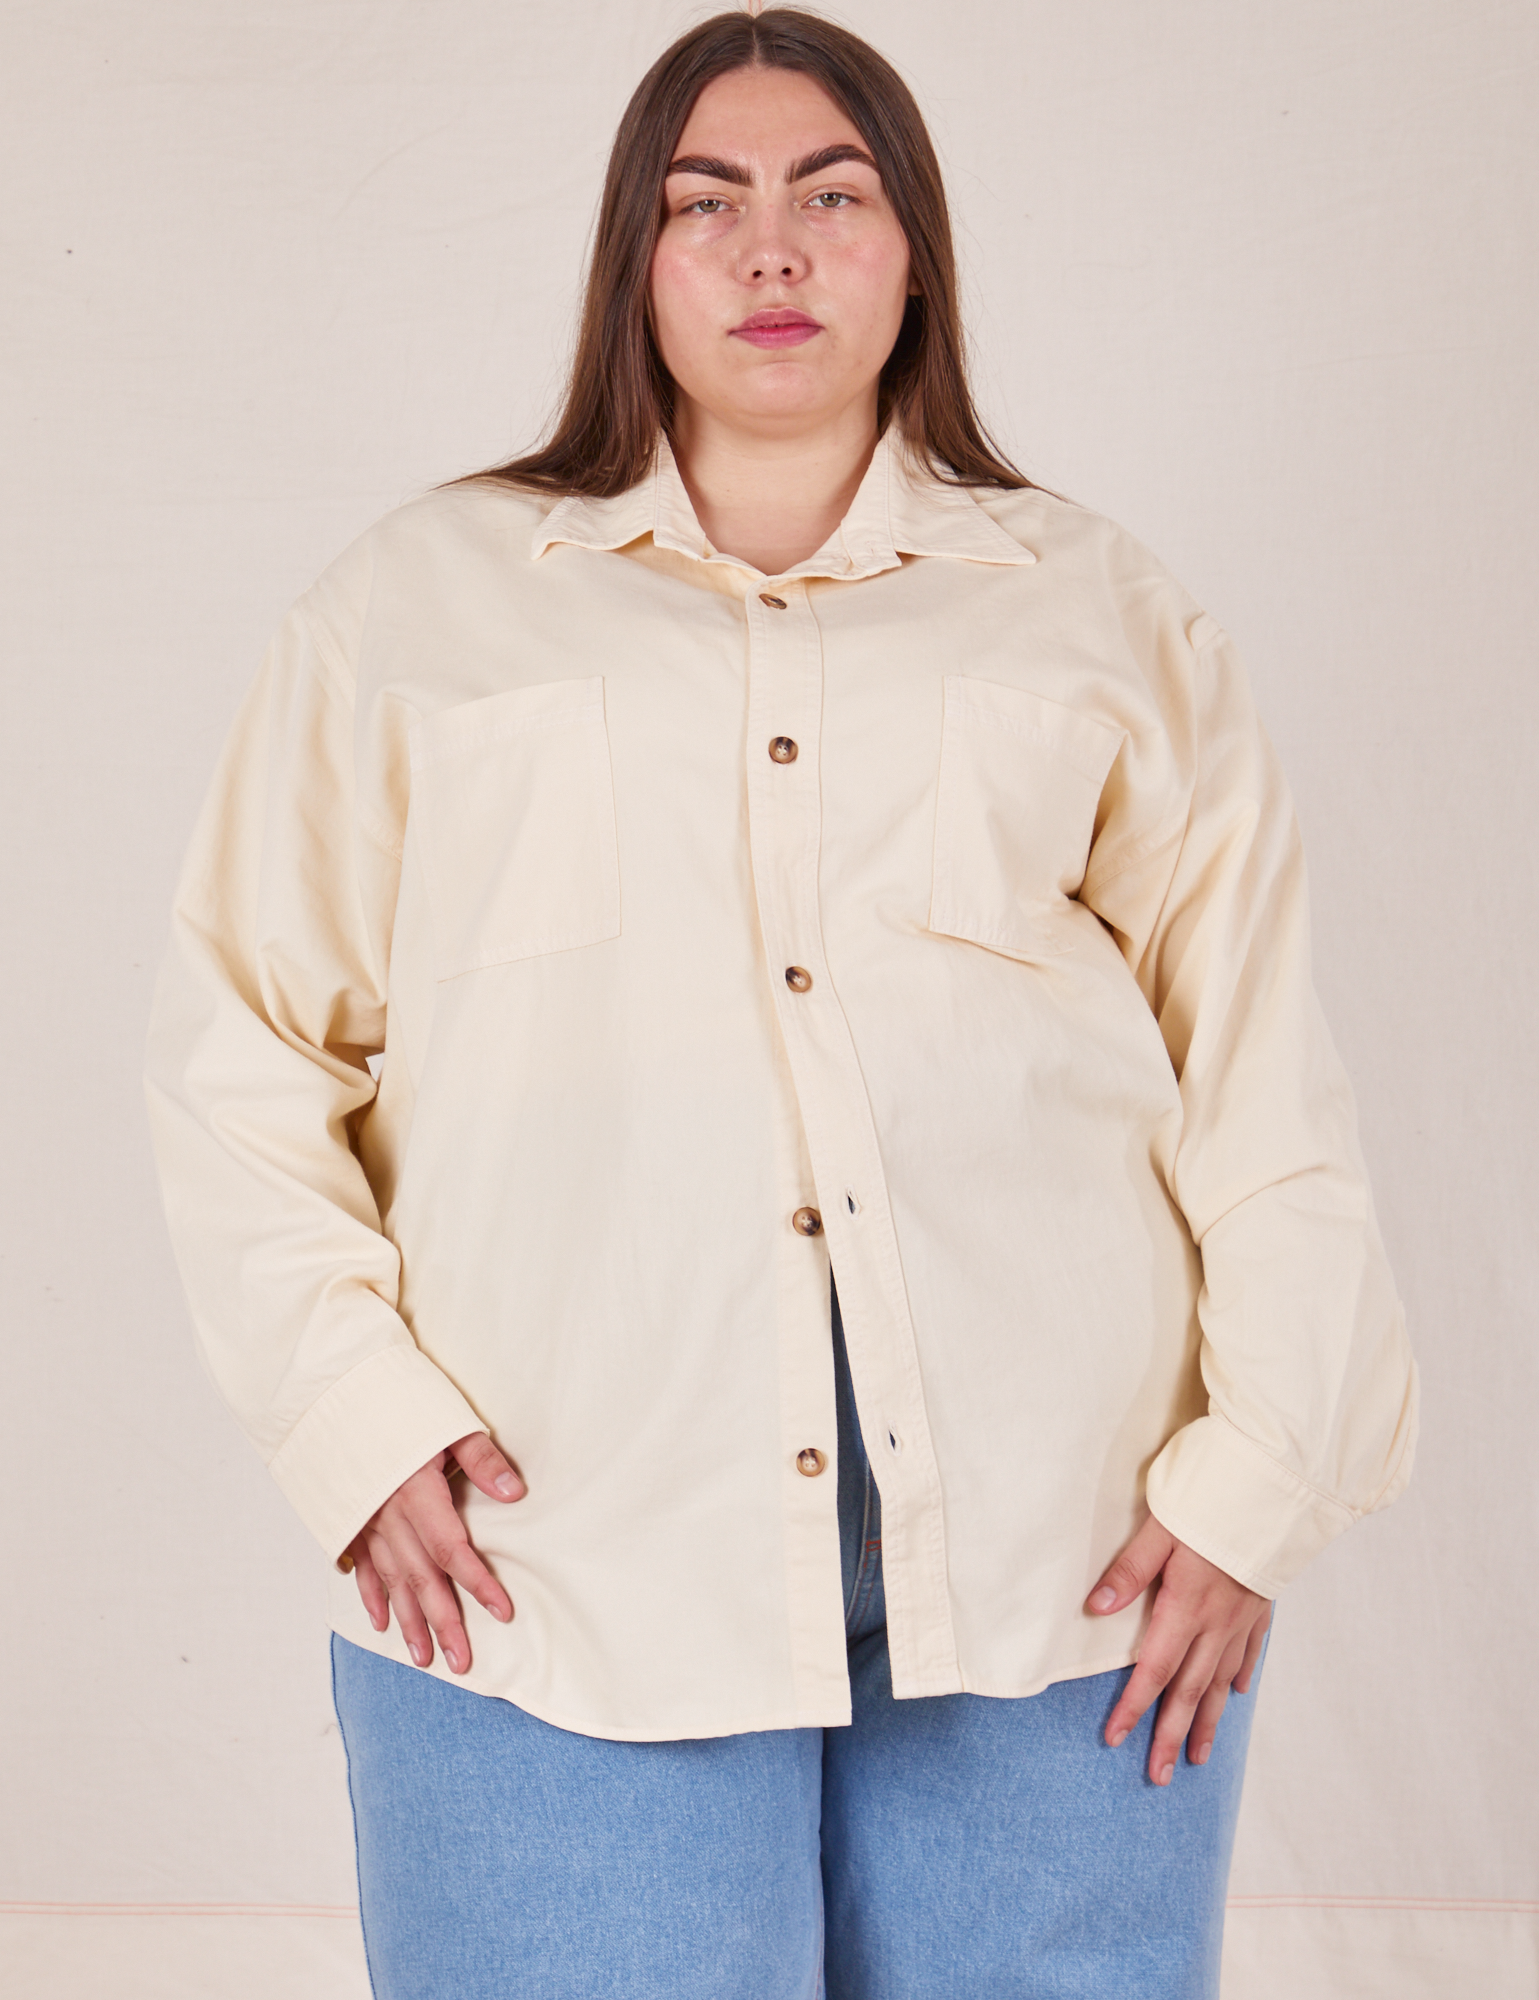 Marielena is wearing a buttoned up Oversize Overshirt in Vintage Tee Off-White